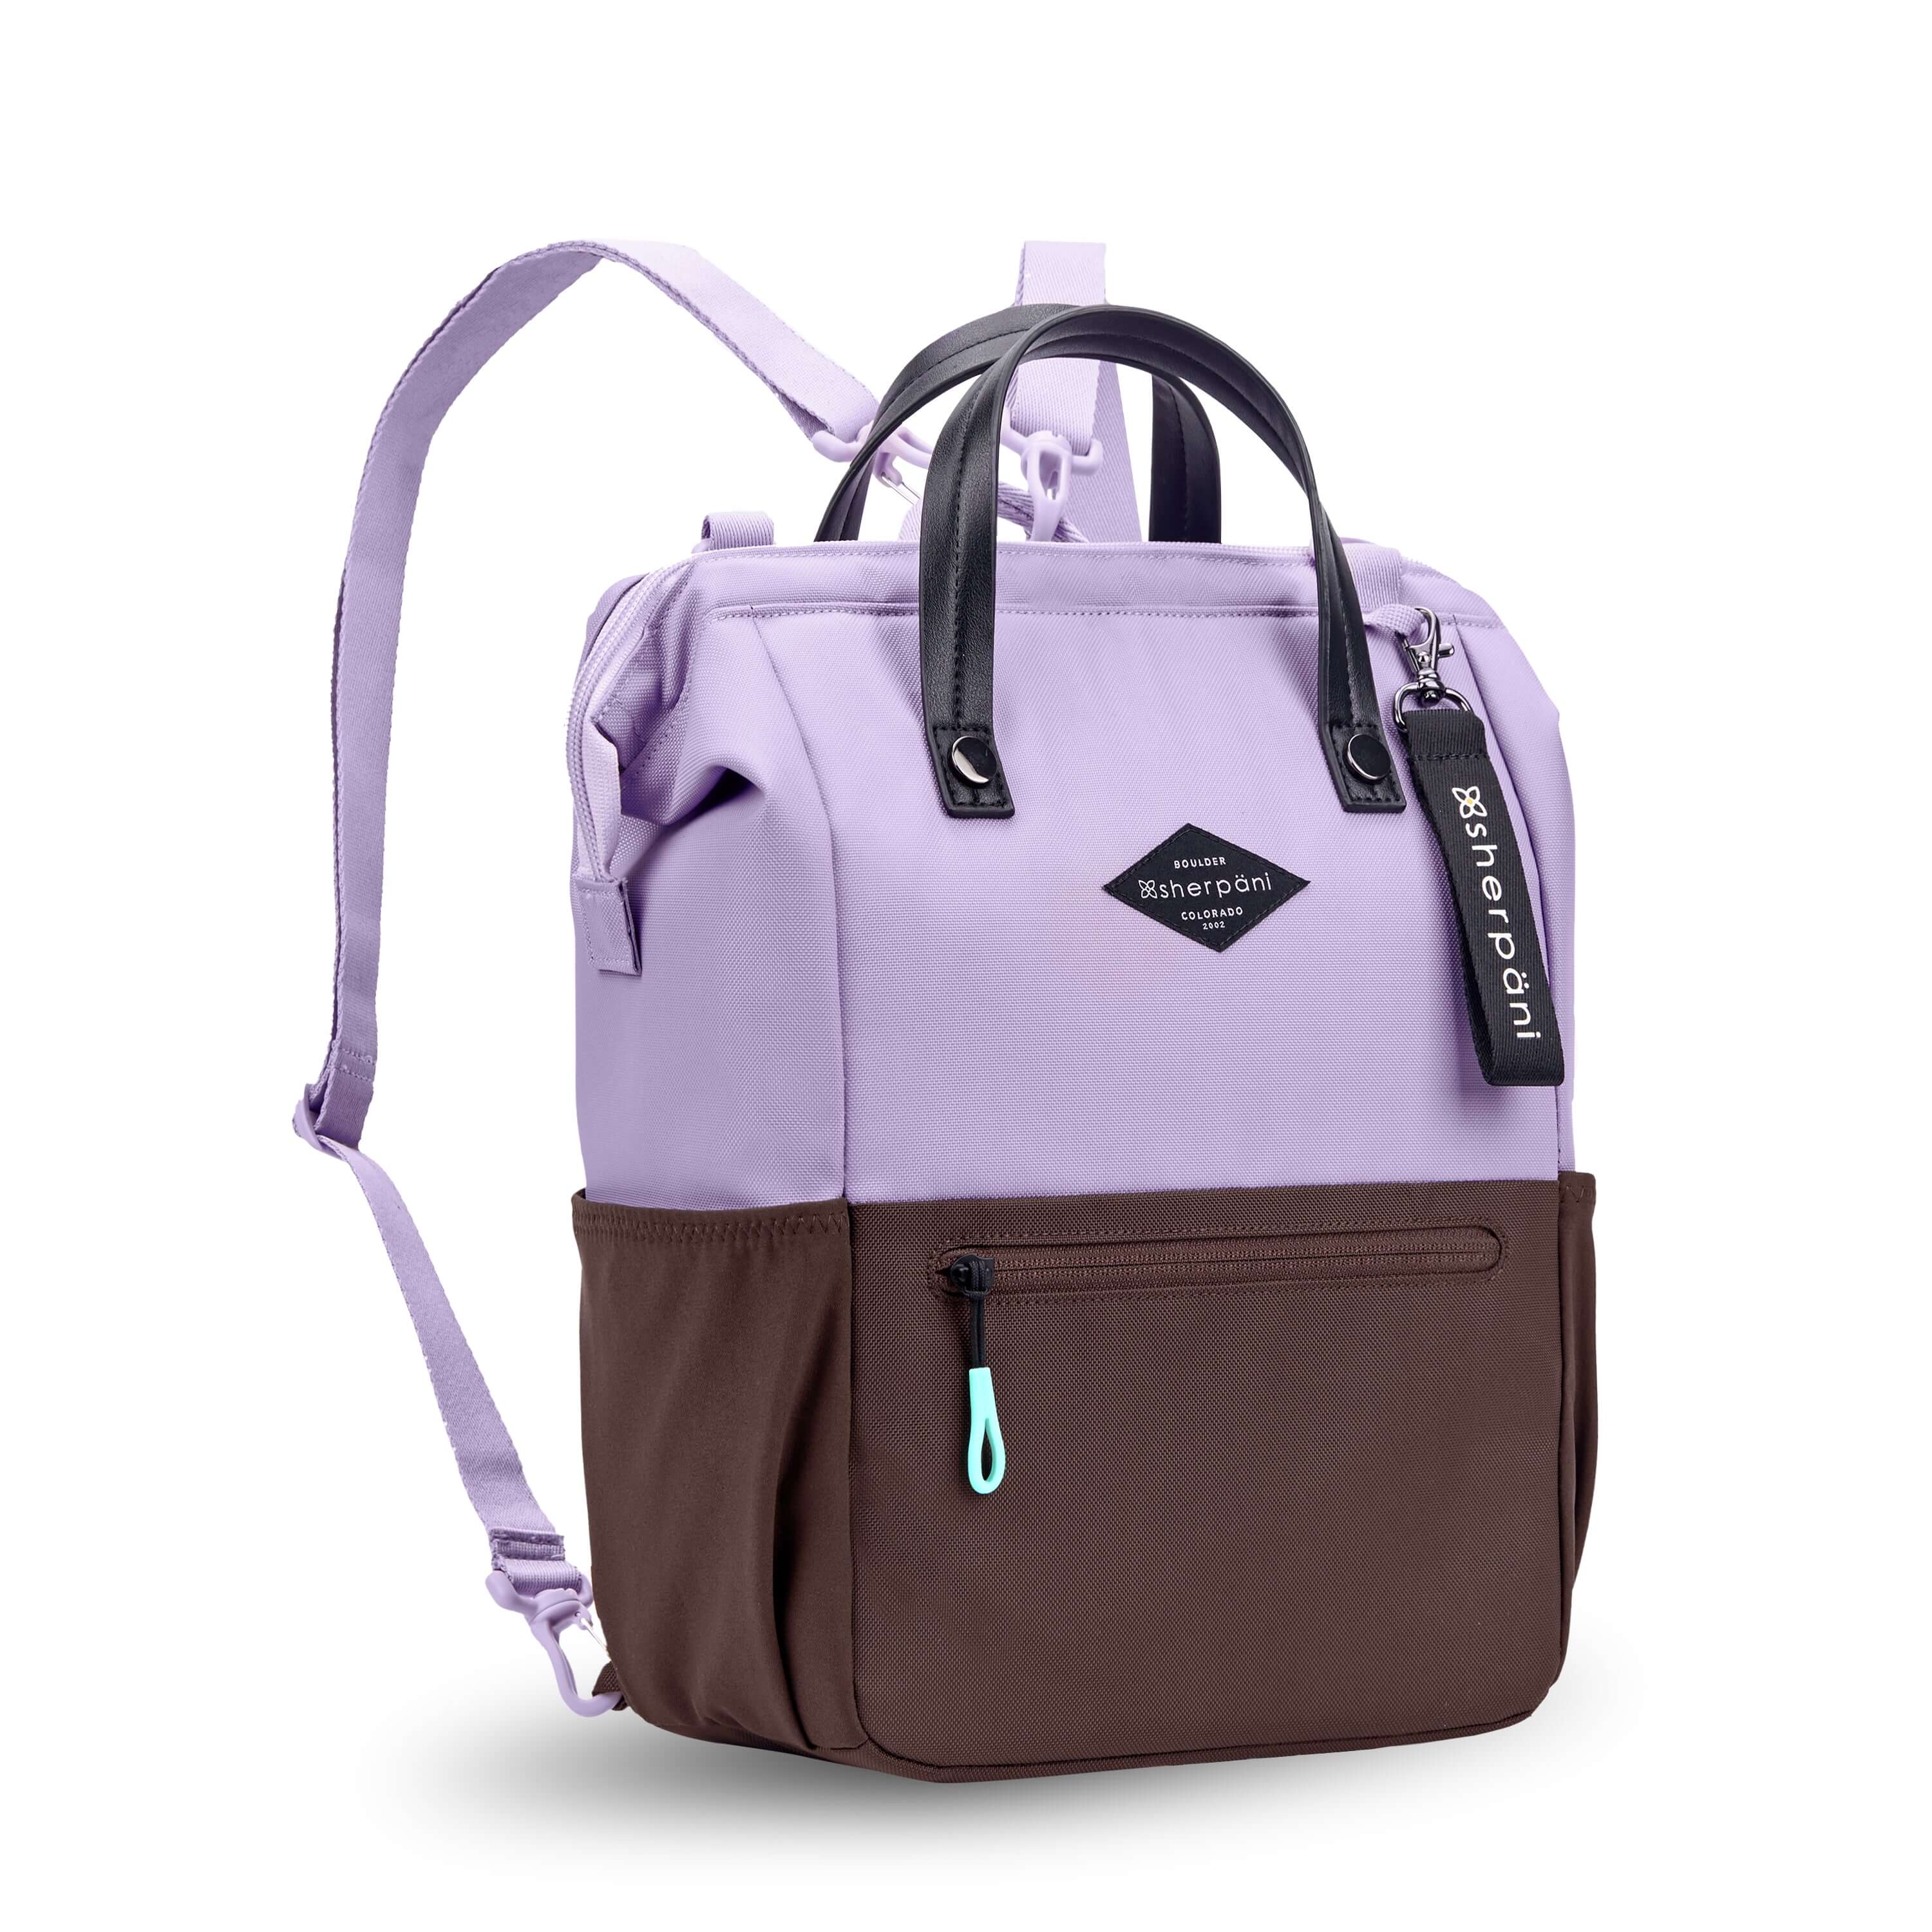 Angled front view of Sherpani three-in-one bag, the Dispatch in Lavender. The bag is two-toned: the top is lavender and the bottom is brown. There is an external zipper pocket on the front panel. Easy-pull zippers are accented in aqua. A branded Sherpani keychain is clipped to the upper right corner. Elastic water bottle holders sit on either side of the bag. It has short tote handles and adjustable/detachable straps that can function for a backpack or crossbody.